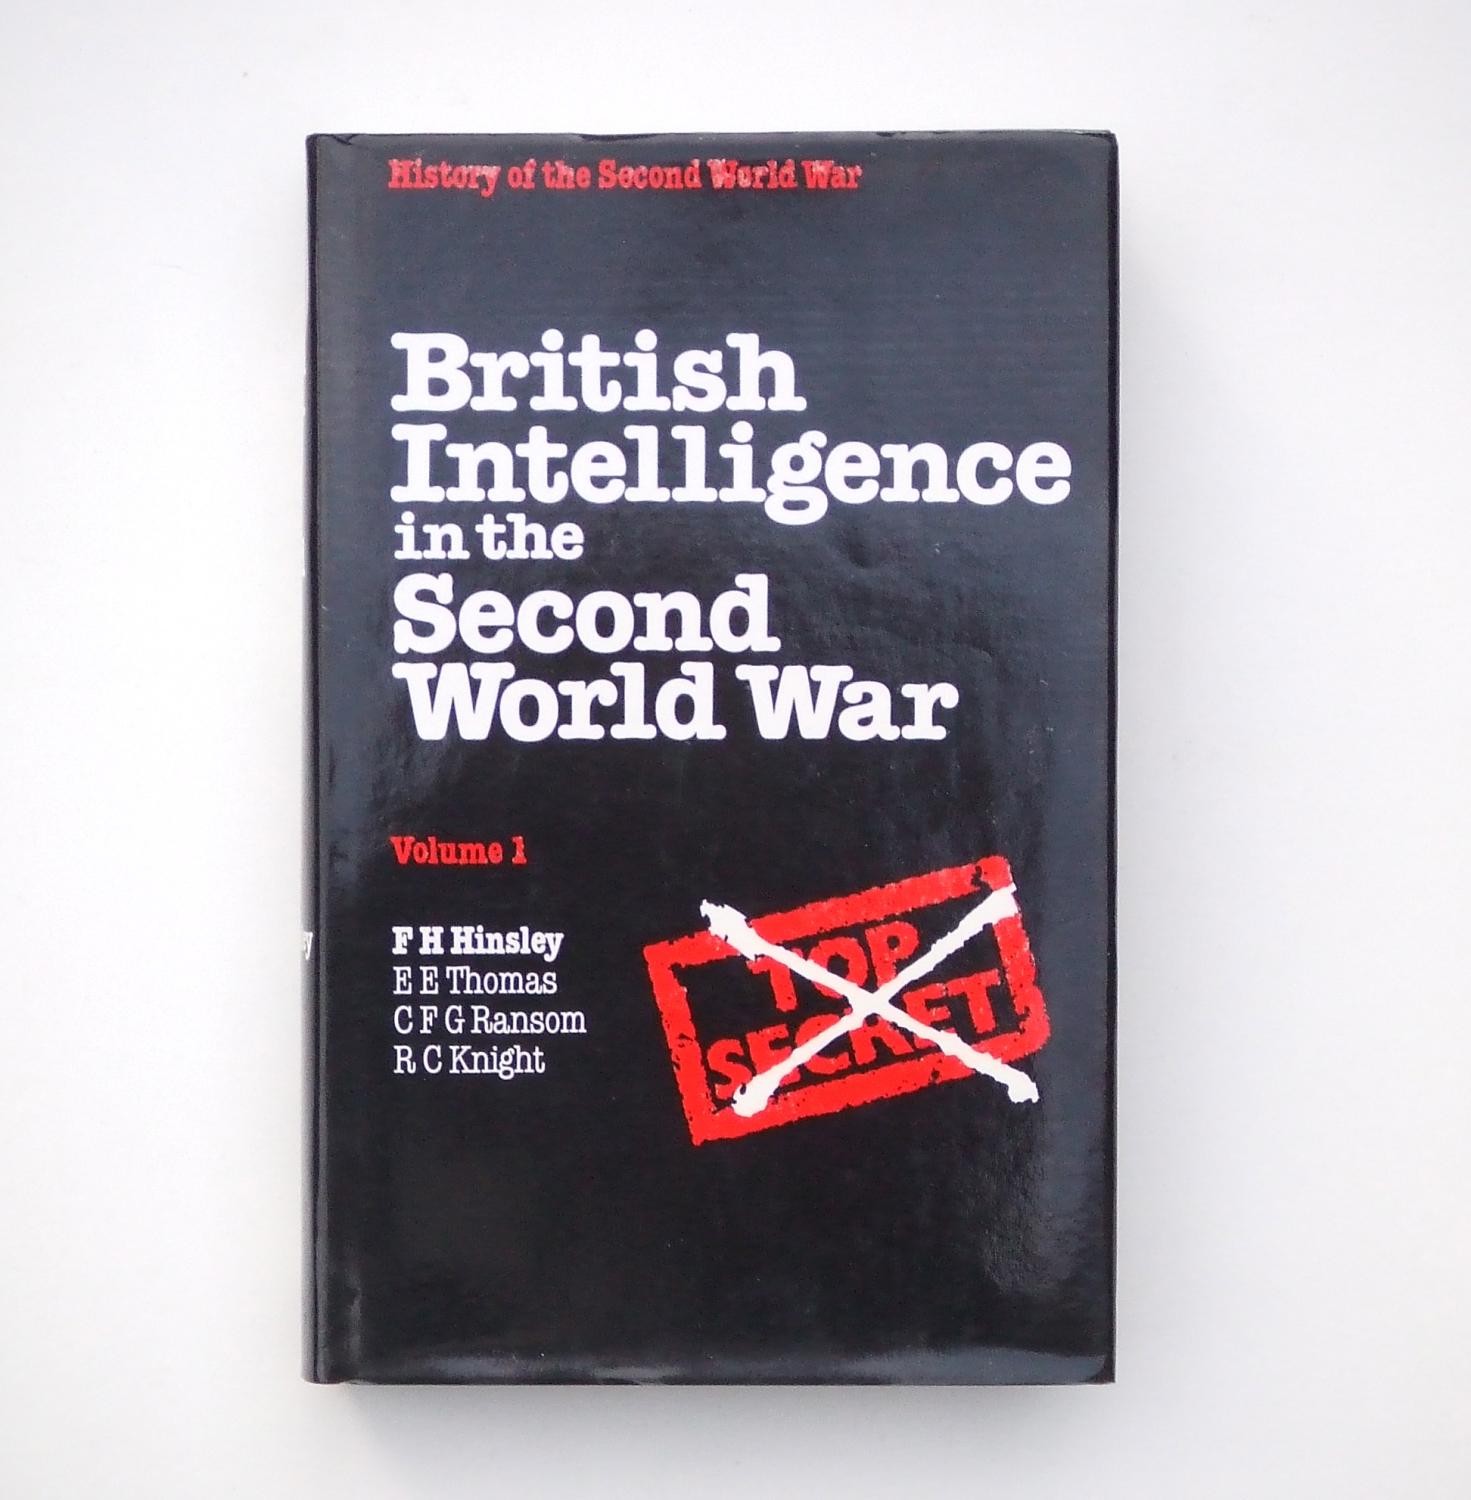 British Intelligence in the Second World War. Its influence on strategy and operations. Volume 1 - HINSLEY, F.H., THOMAS, E., RANSOM, C.F.G., KNIGHT, R.C.